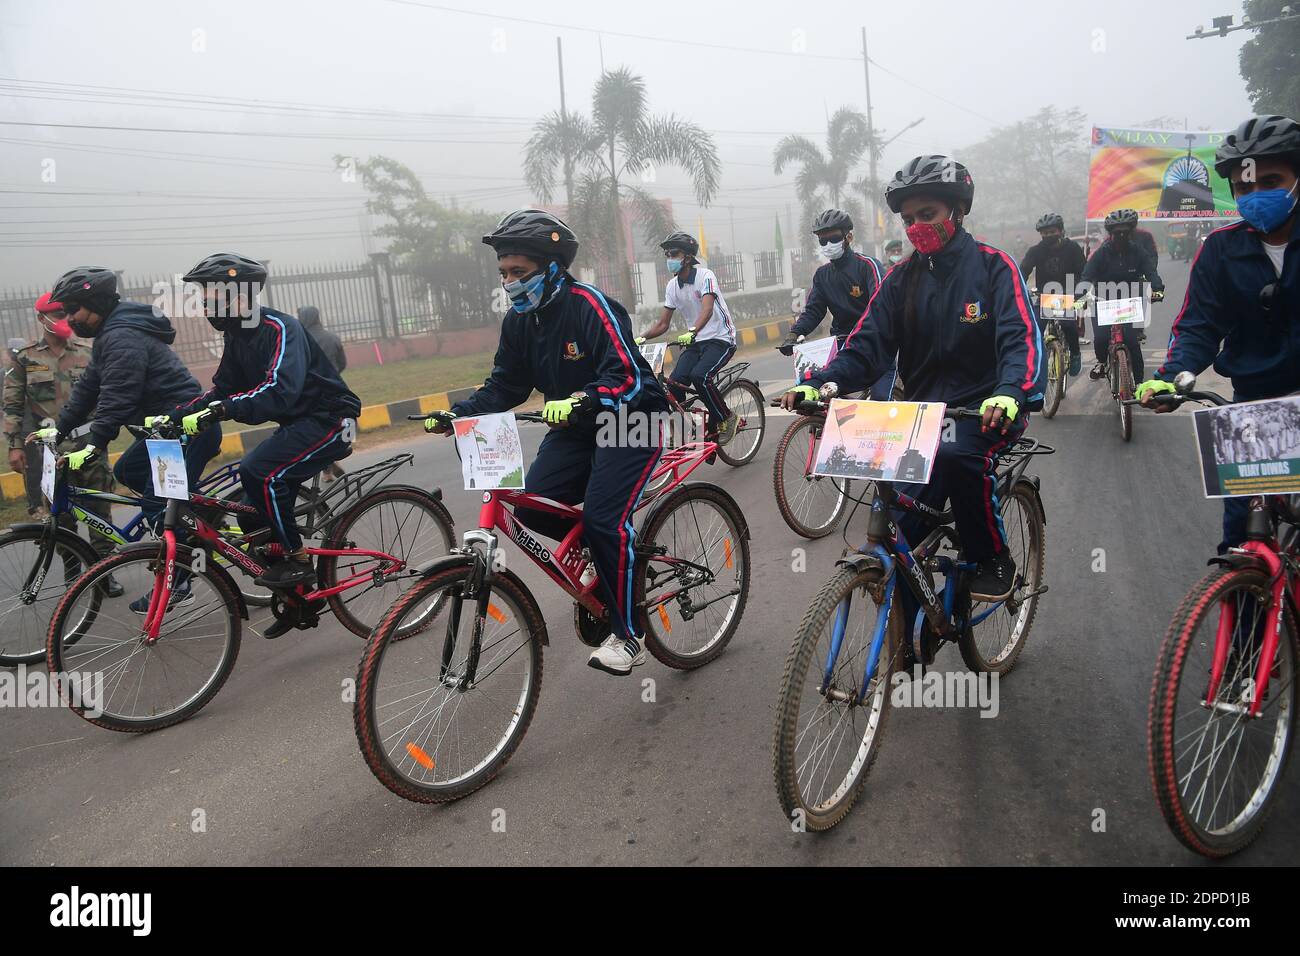 NCC cadets are cycling on the occasion of 50th Anniversary of Vijay Diwas, in Agartala. Vijay Diwas is commemorated on 16th December in Bangladesh, to observe Indian military victory over Pakistan in the war of 1971 for the liberation of Bangladesh from Pakistan. Agartala, Tripura, India. Stock Photo